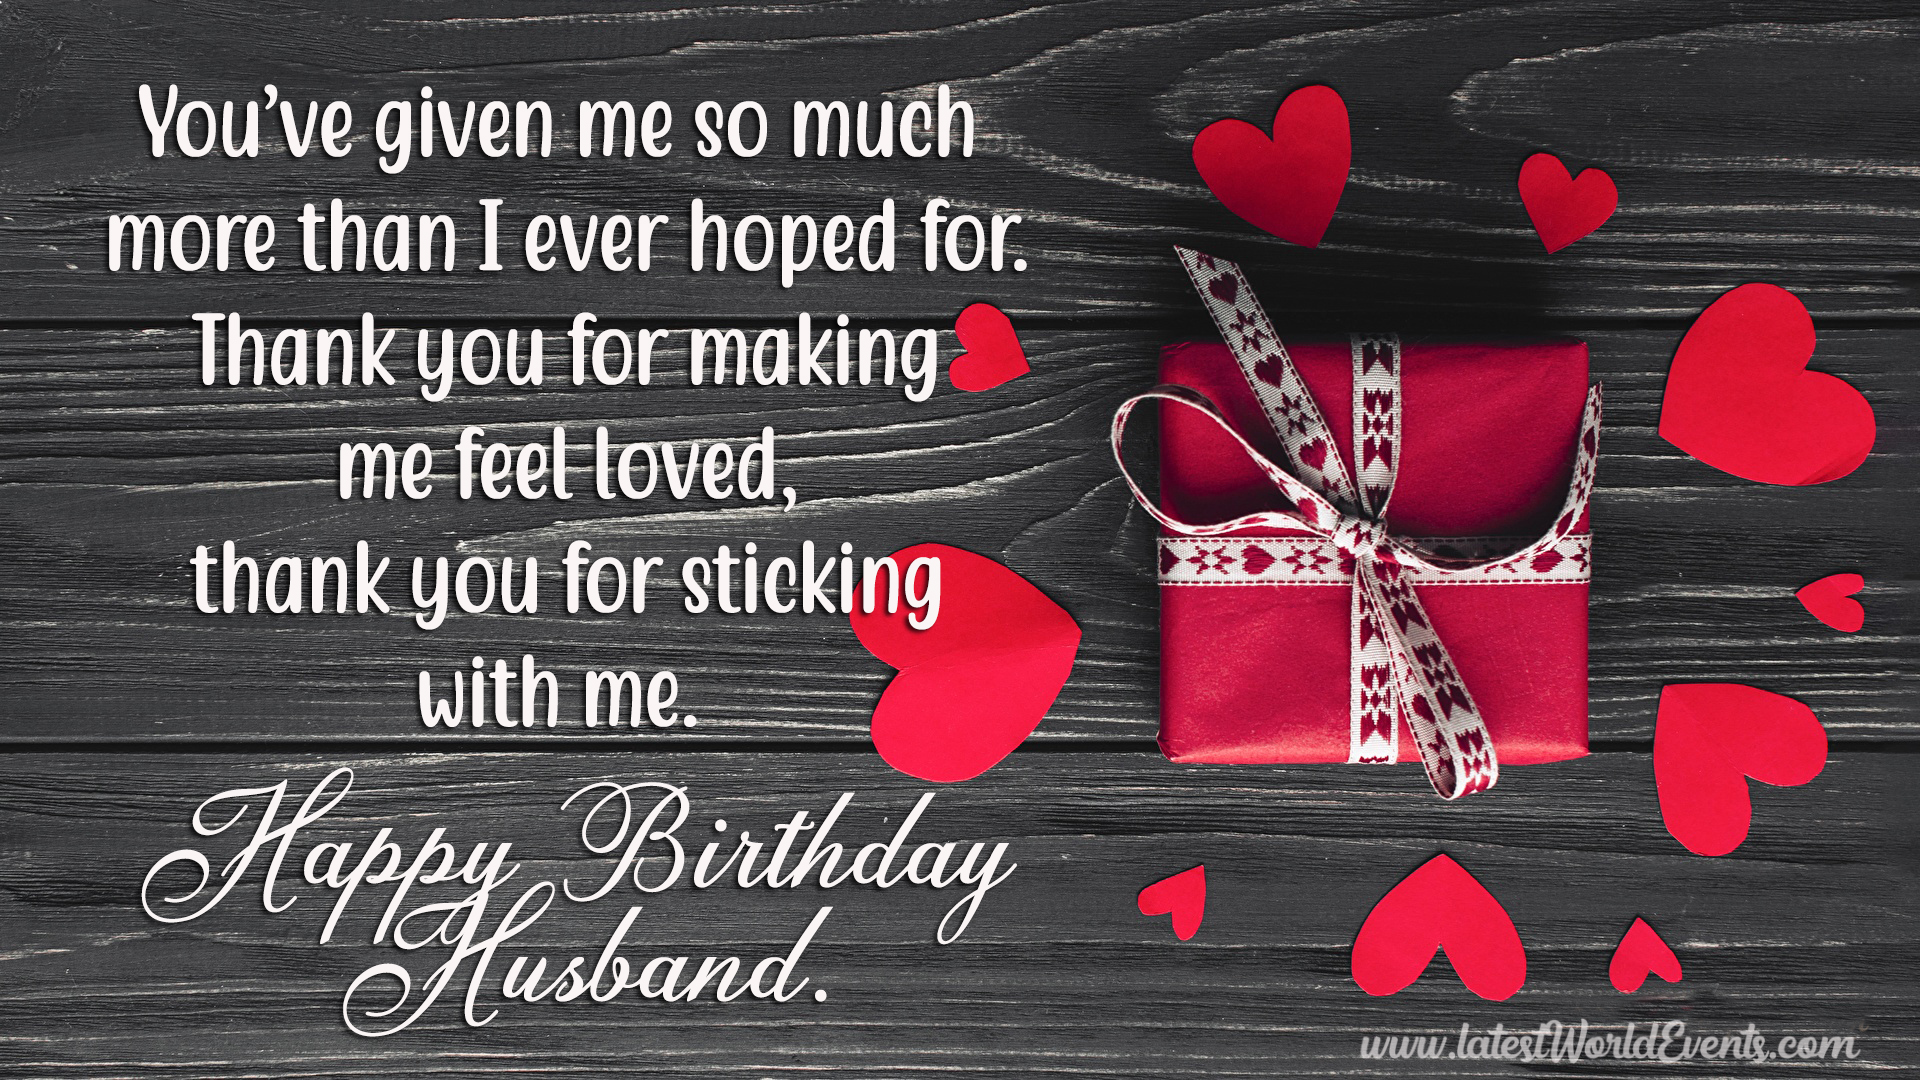 Romantic Birthday Wishes For Husband Latest World Events